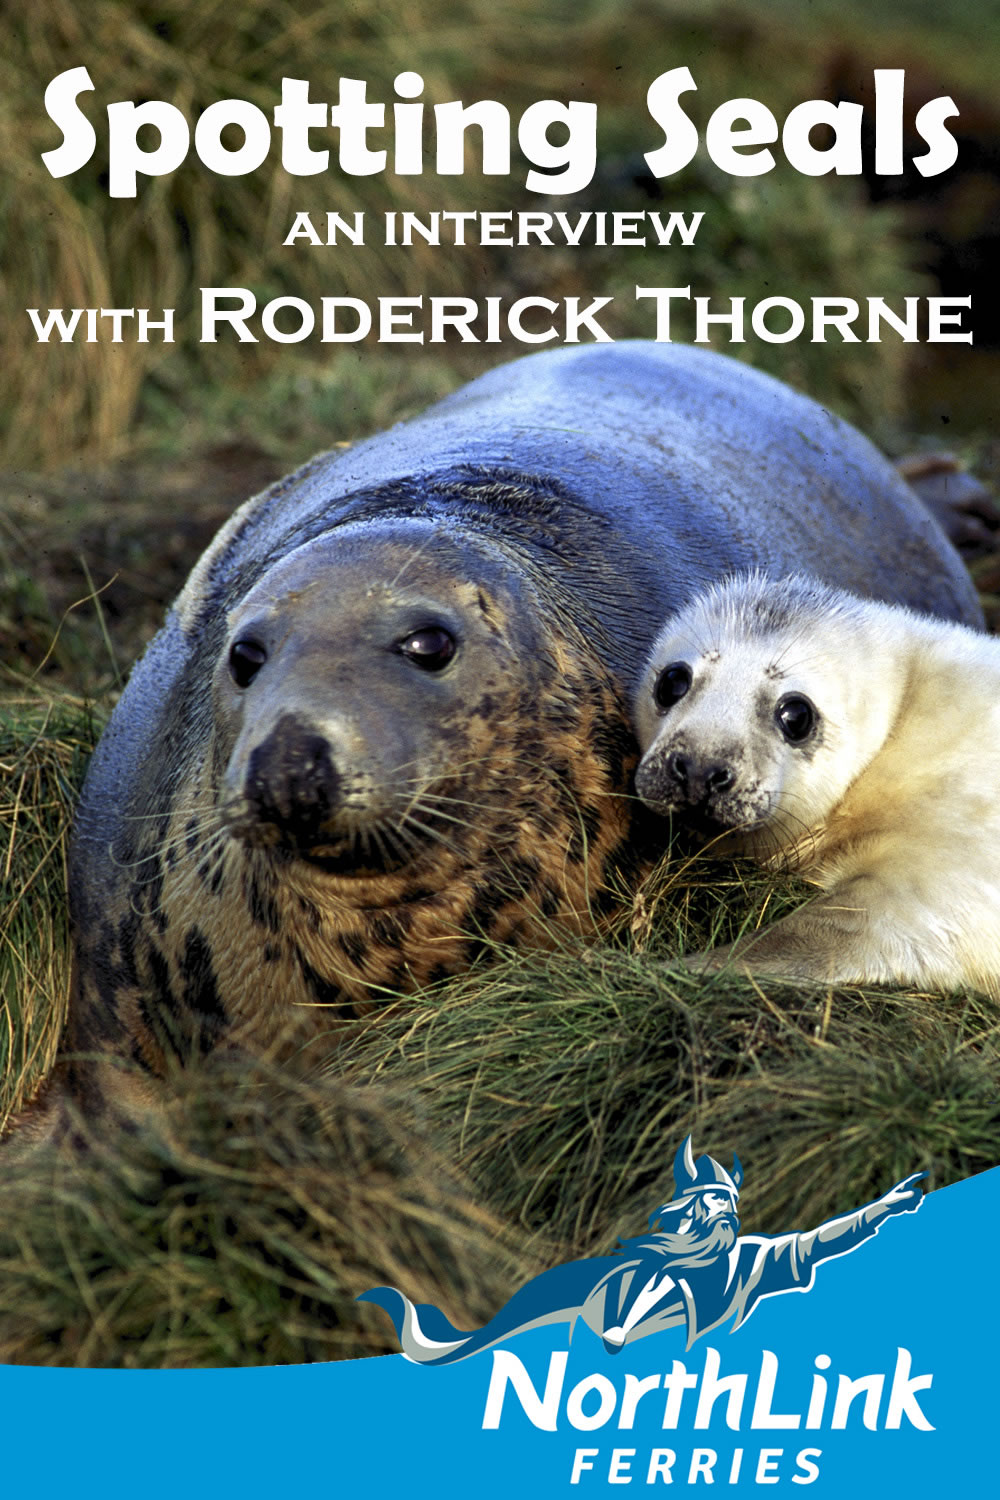 Spotting Seals - an interview with Roderick Thorne